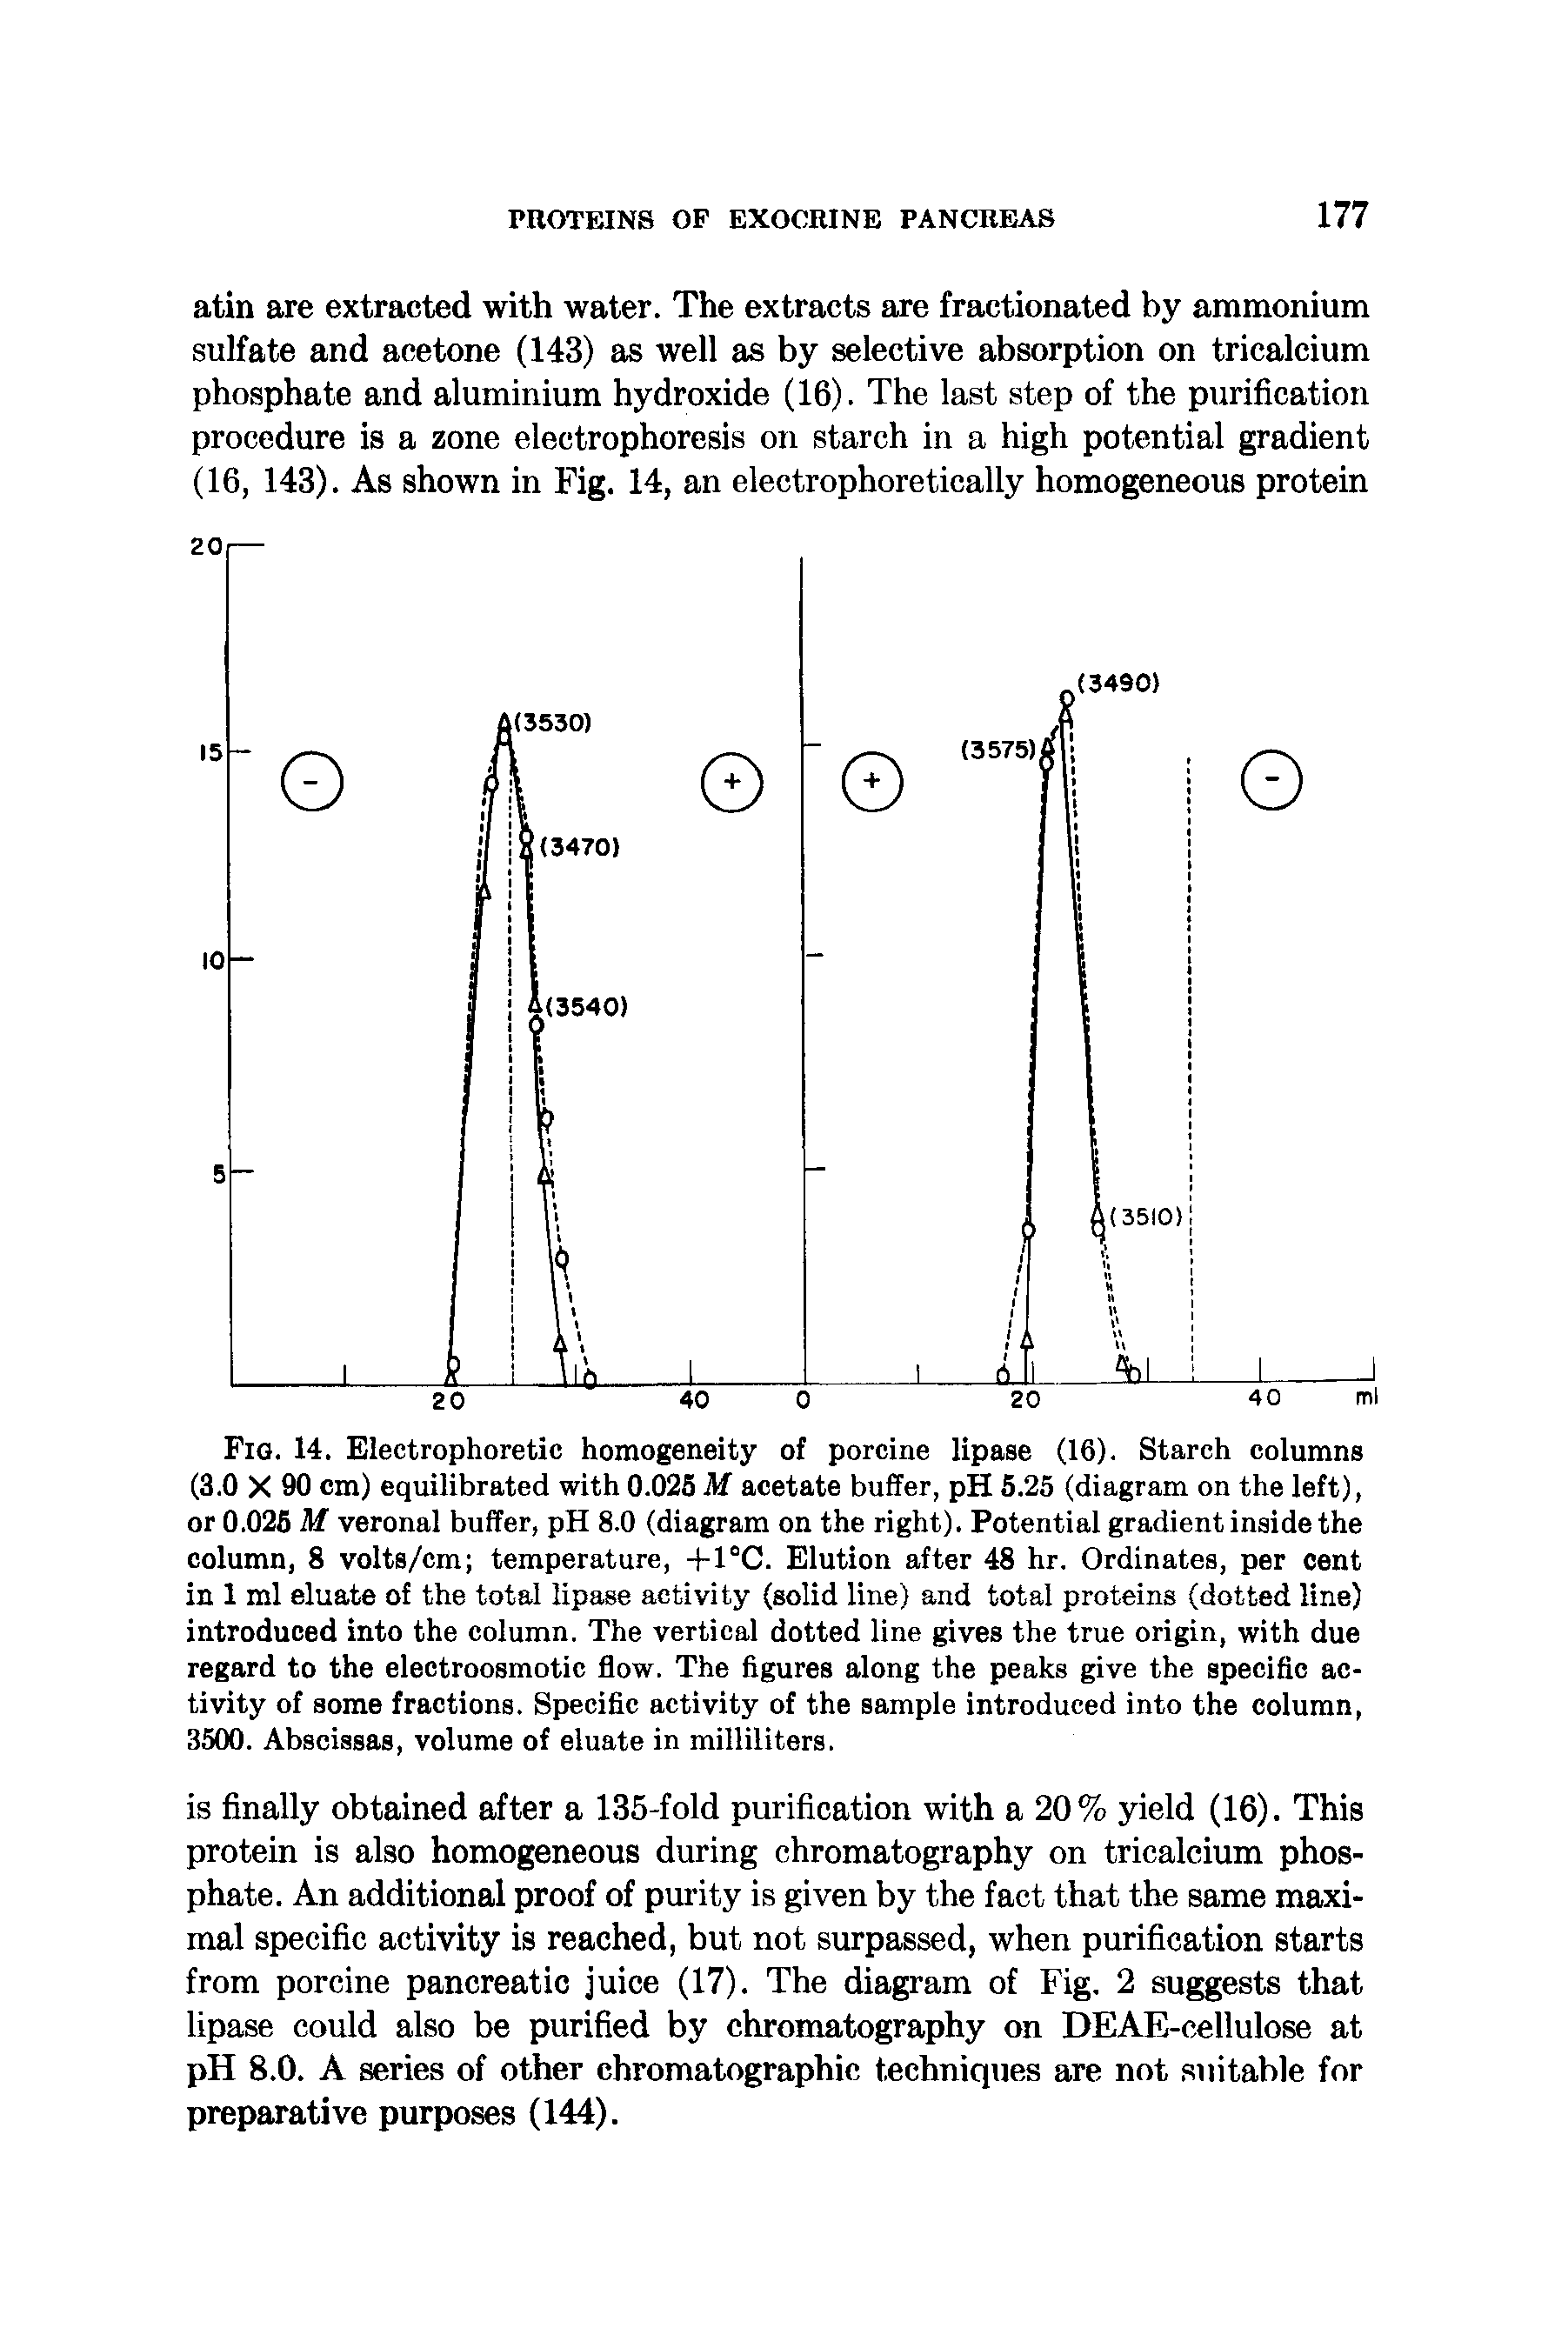 Fig. 14. Electrophoretic homogeneity of porcine lipase (16). Starch columns (3.0 X 90 cm) equilibrated with 0.025 M acetate buffer, pH 5.25 (diagram on the left), or 0.025 Af veronal buffer, pH 8.0 (diagram on the right). Potential gradient inside the column, 8 volts/cm temperature, +1°C. Elution after 48 hr. Ordinates, per cent in 1 ml eluate of the total lipase activity (solid line) and total proteins (dotted line) introduced into the column. The vertical dotted line gives the true origin, with due regard to the electroosmotic flow. The figures along the peaks give the specific activity of some fractions. Specific activity of the sample introduced into the column, 3500. Abscissas, volume of eluate in milliliters.